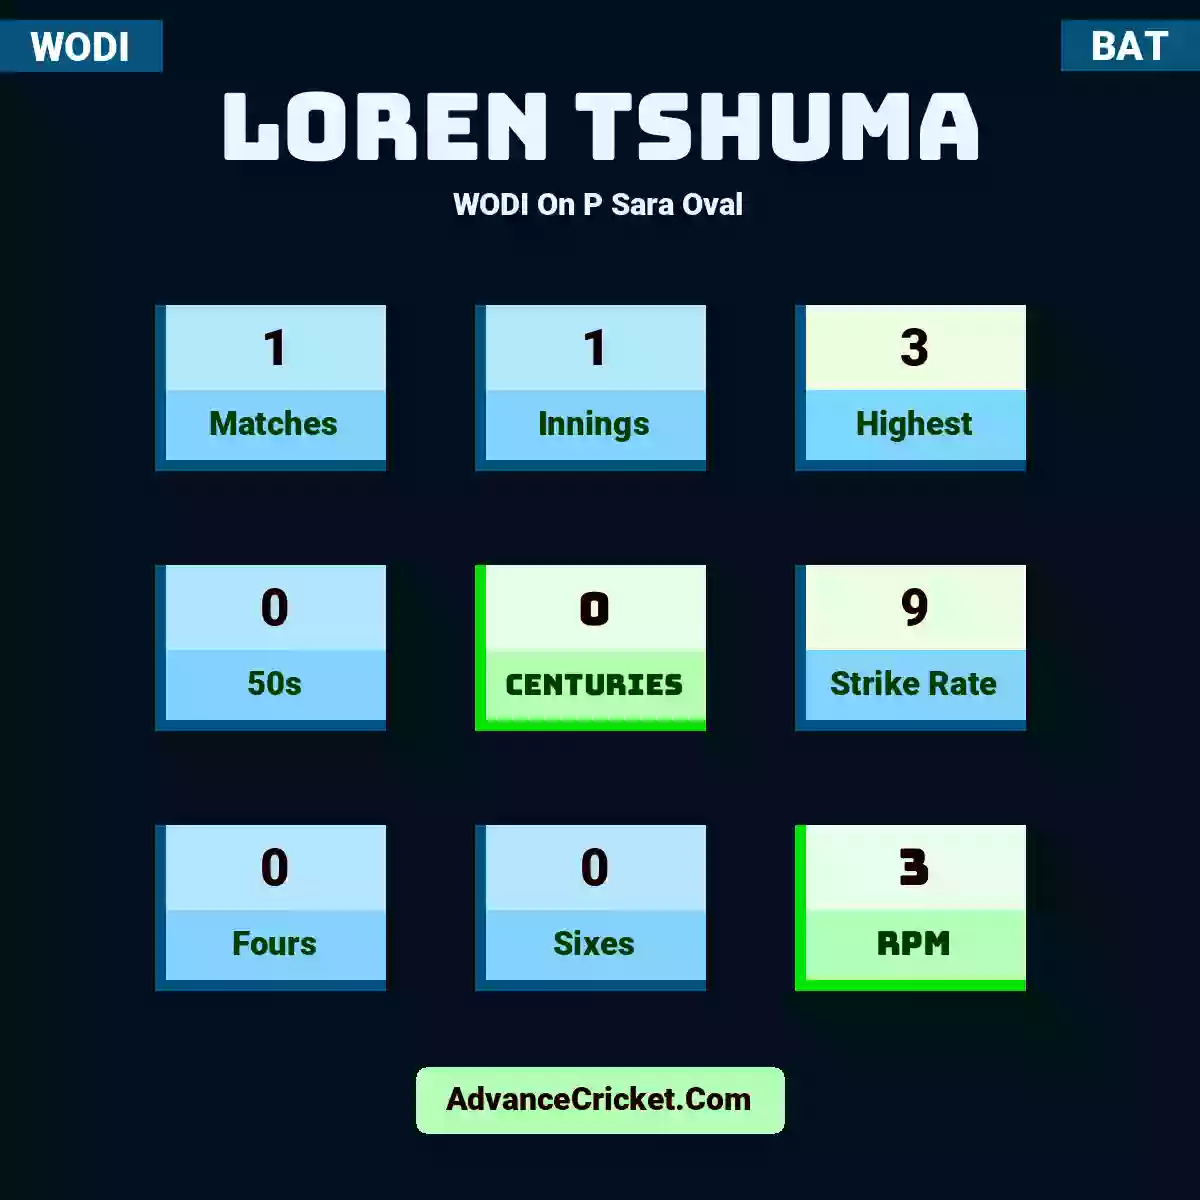 Loren Tshuma WODI  On P Sara Oval, Loren Tshuma played 1 matches, scored 3 runs as highest, 0 half-centuries, and 0 centuries, with a strike rate of 9. L.Tshuma hit 0 fours and 0 sixes, with an RPM of 3.